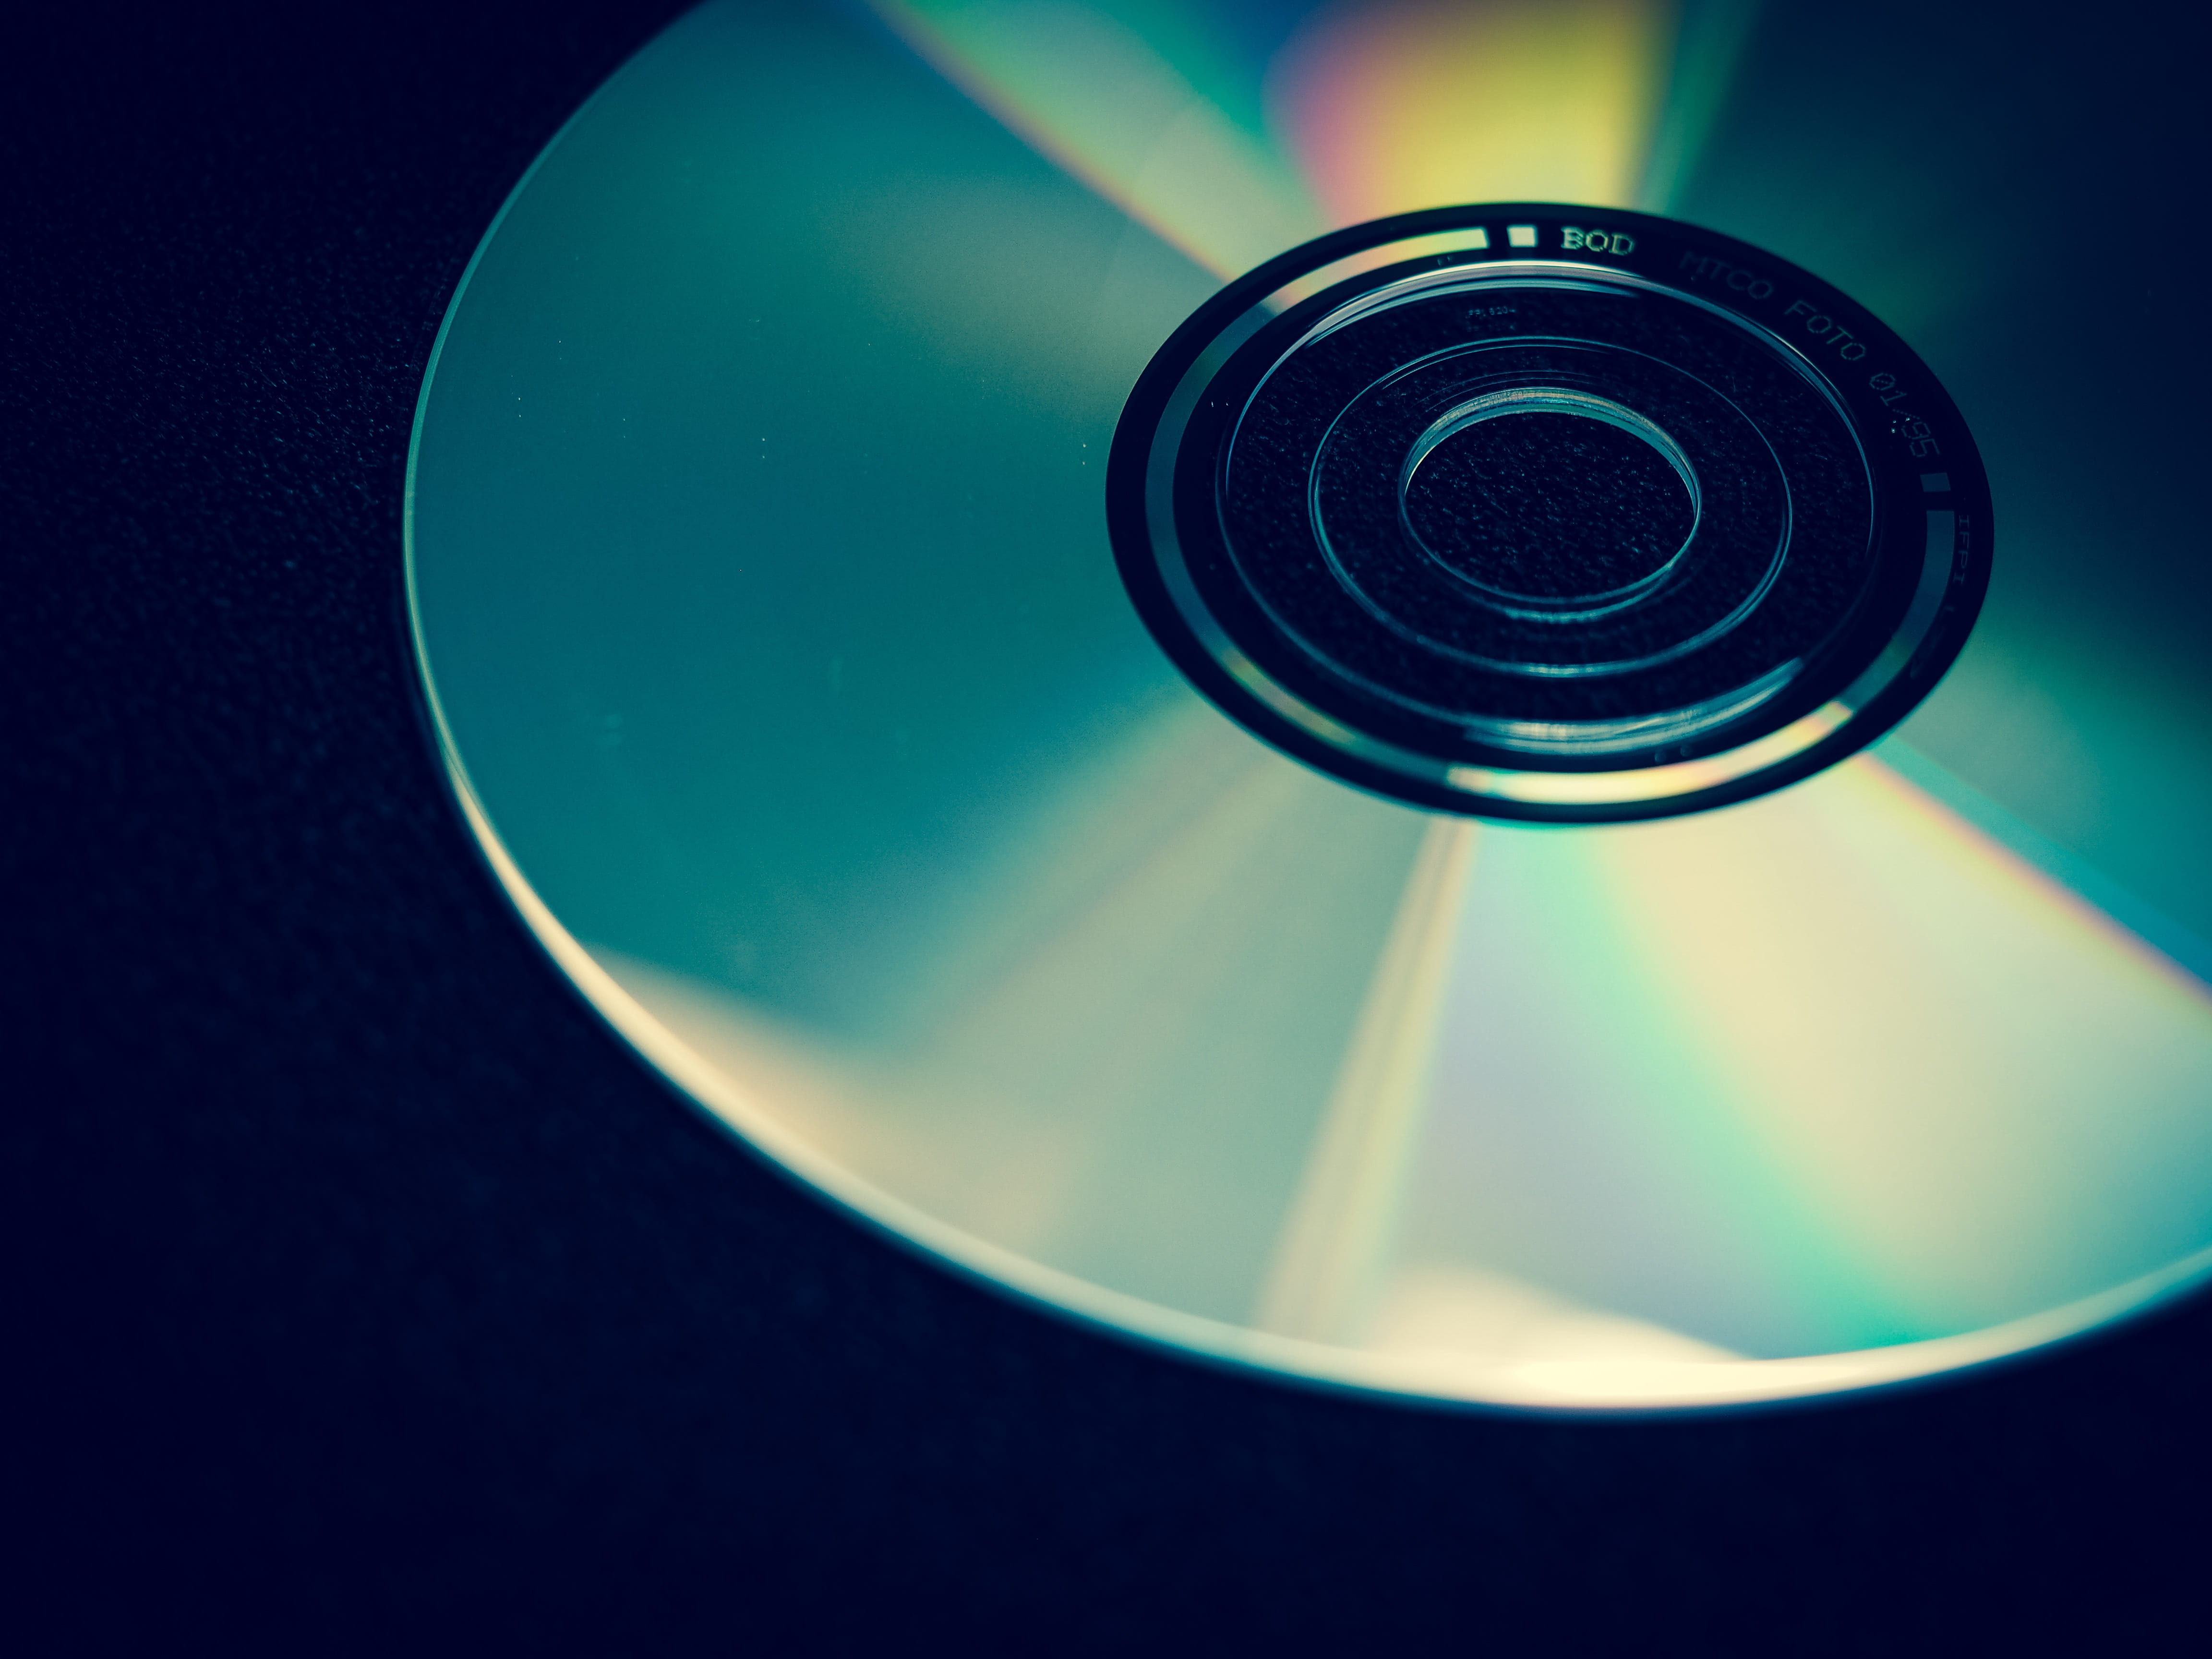 sepia photo of compact disc, cd, dvd, rohlling, computer, digital